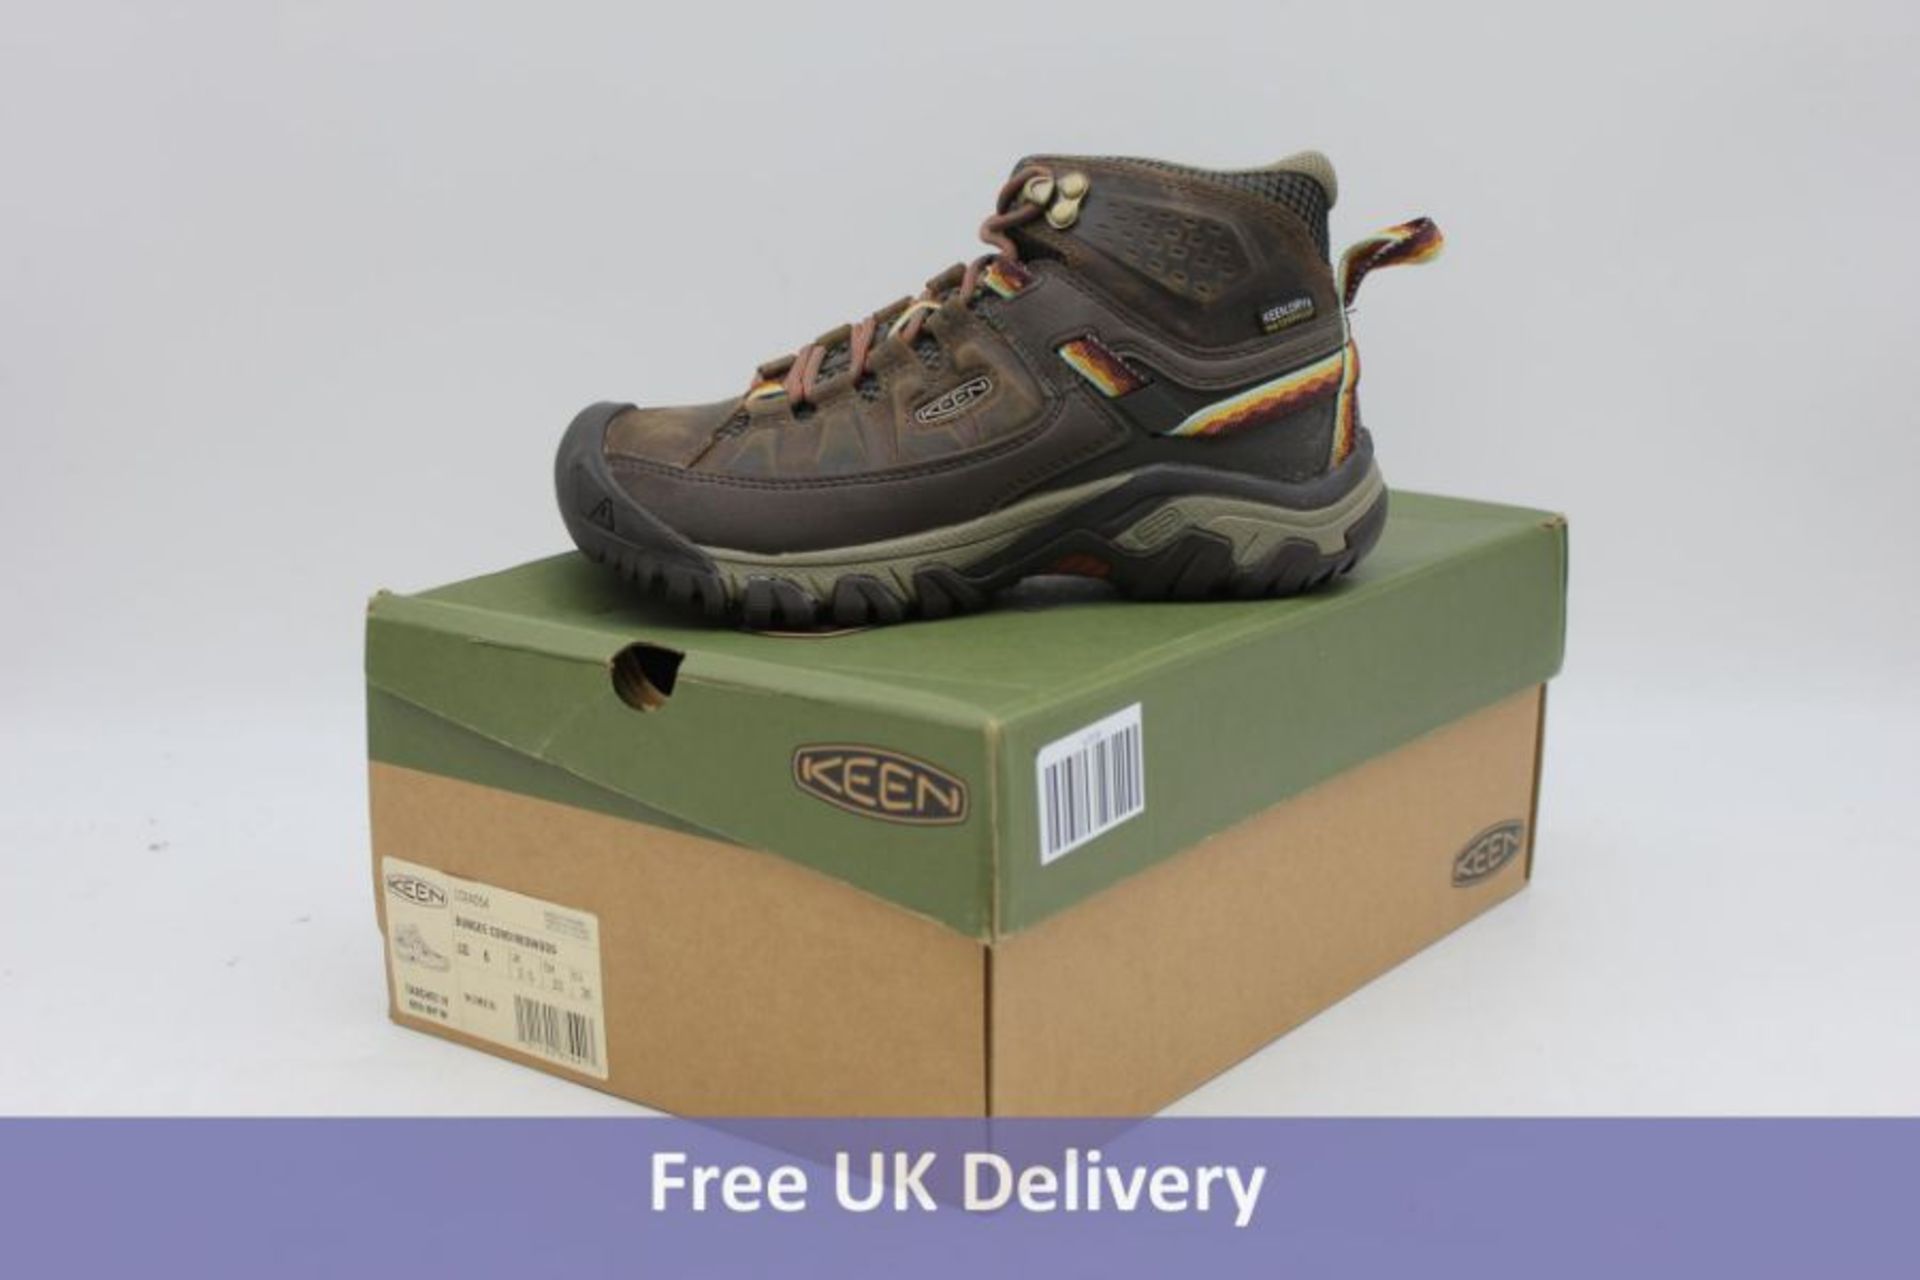 Two Keen Bungee Cord/Redwood Hiking Boots, UK 3.5